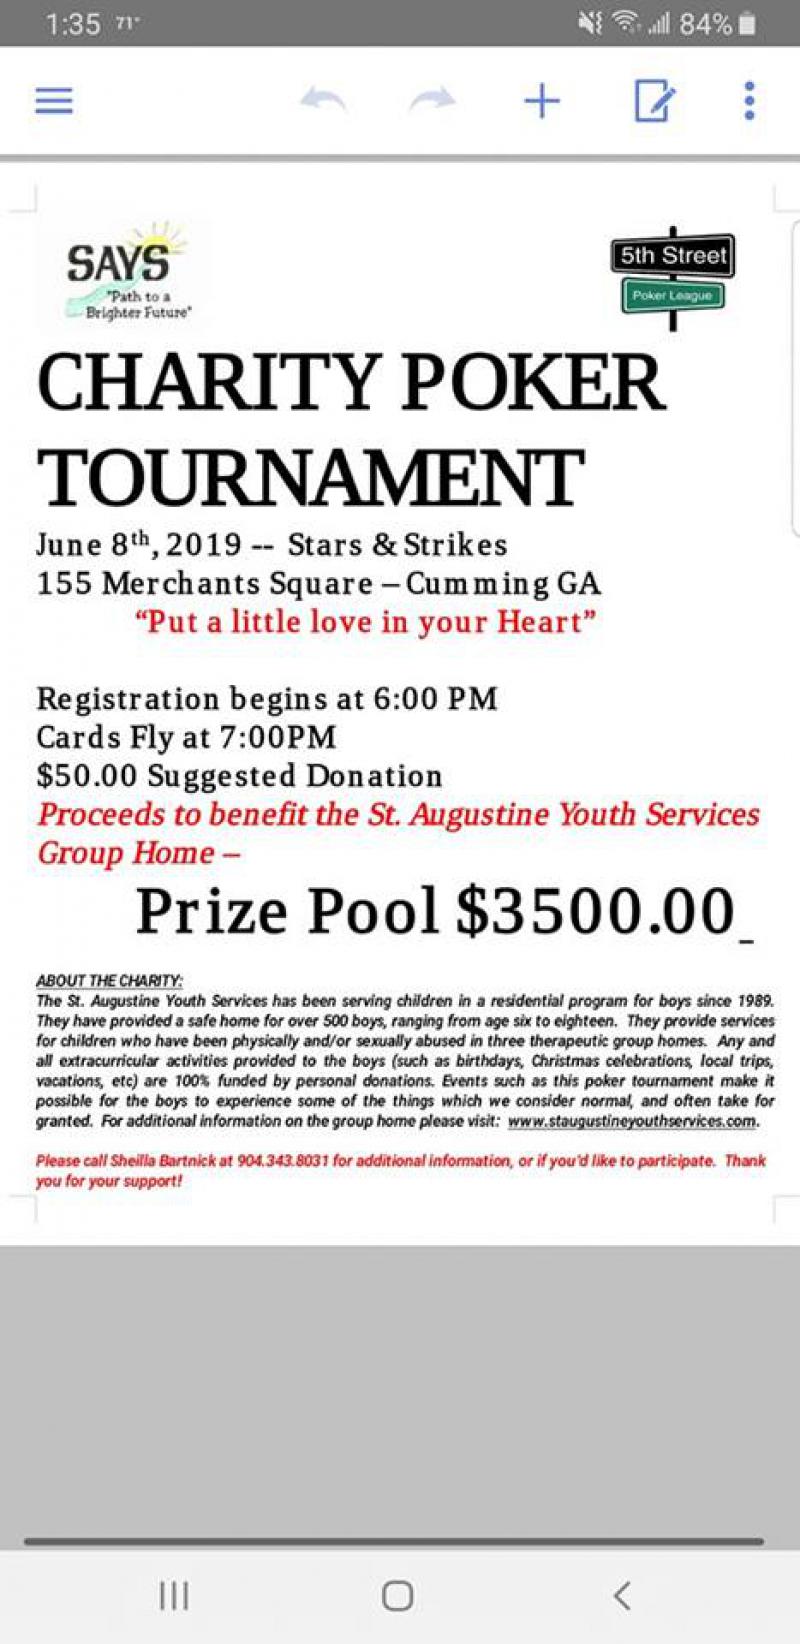 SAYS Charity Tournament - Stars and Strikes at 5thstreetpoker.com